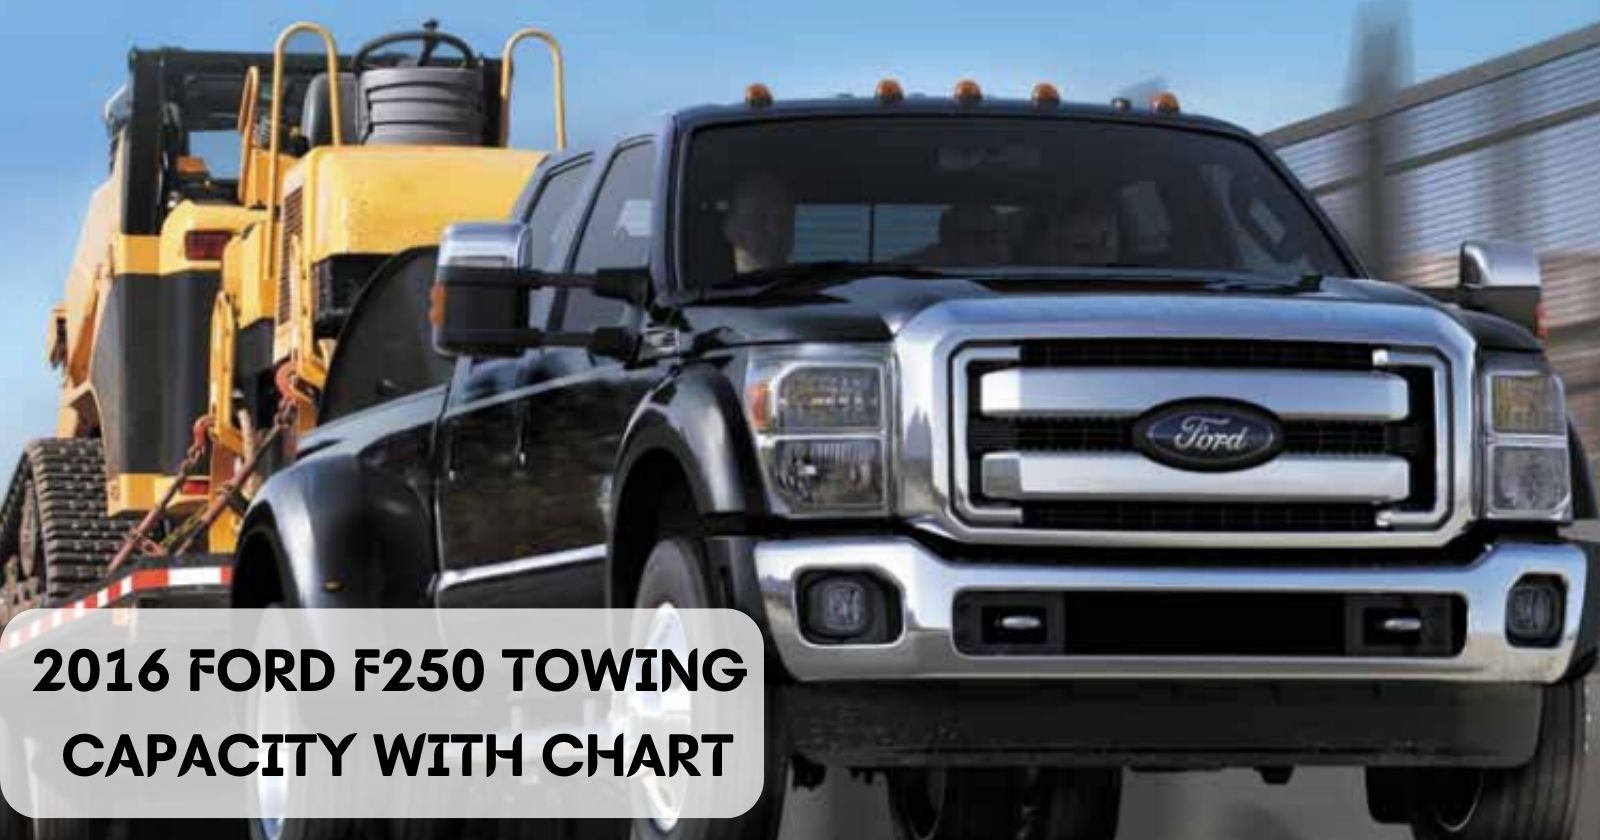 2016-ford-f250-towing-capacity-thecartowing